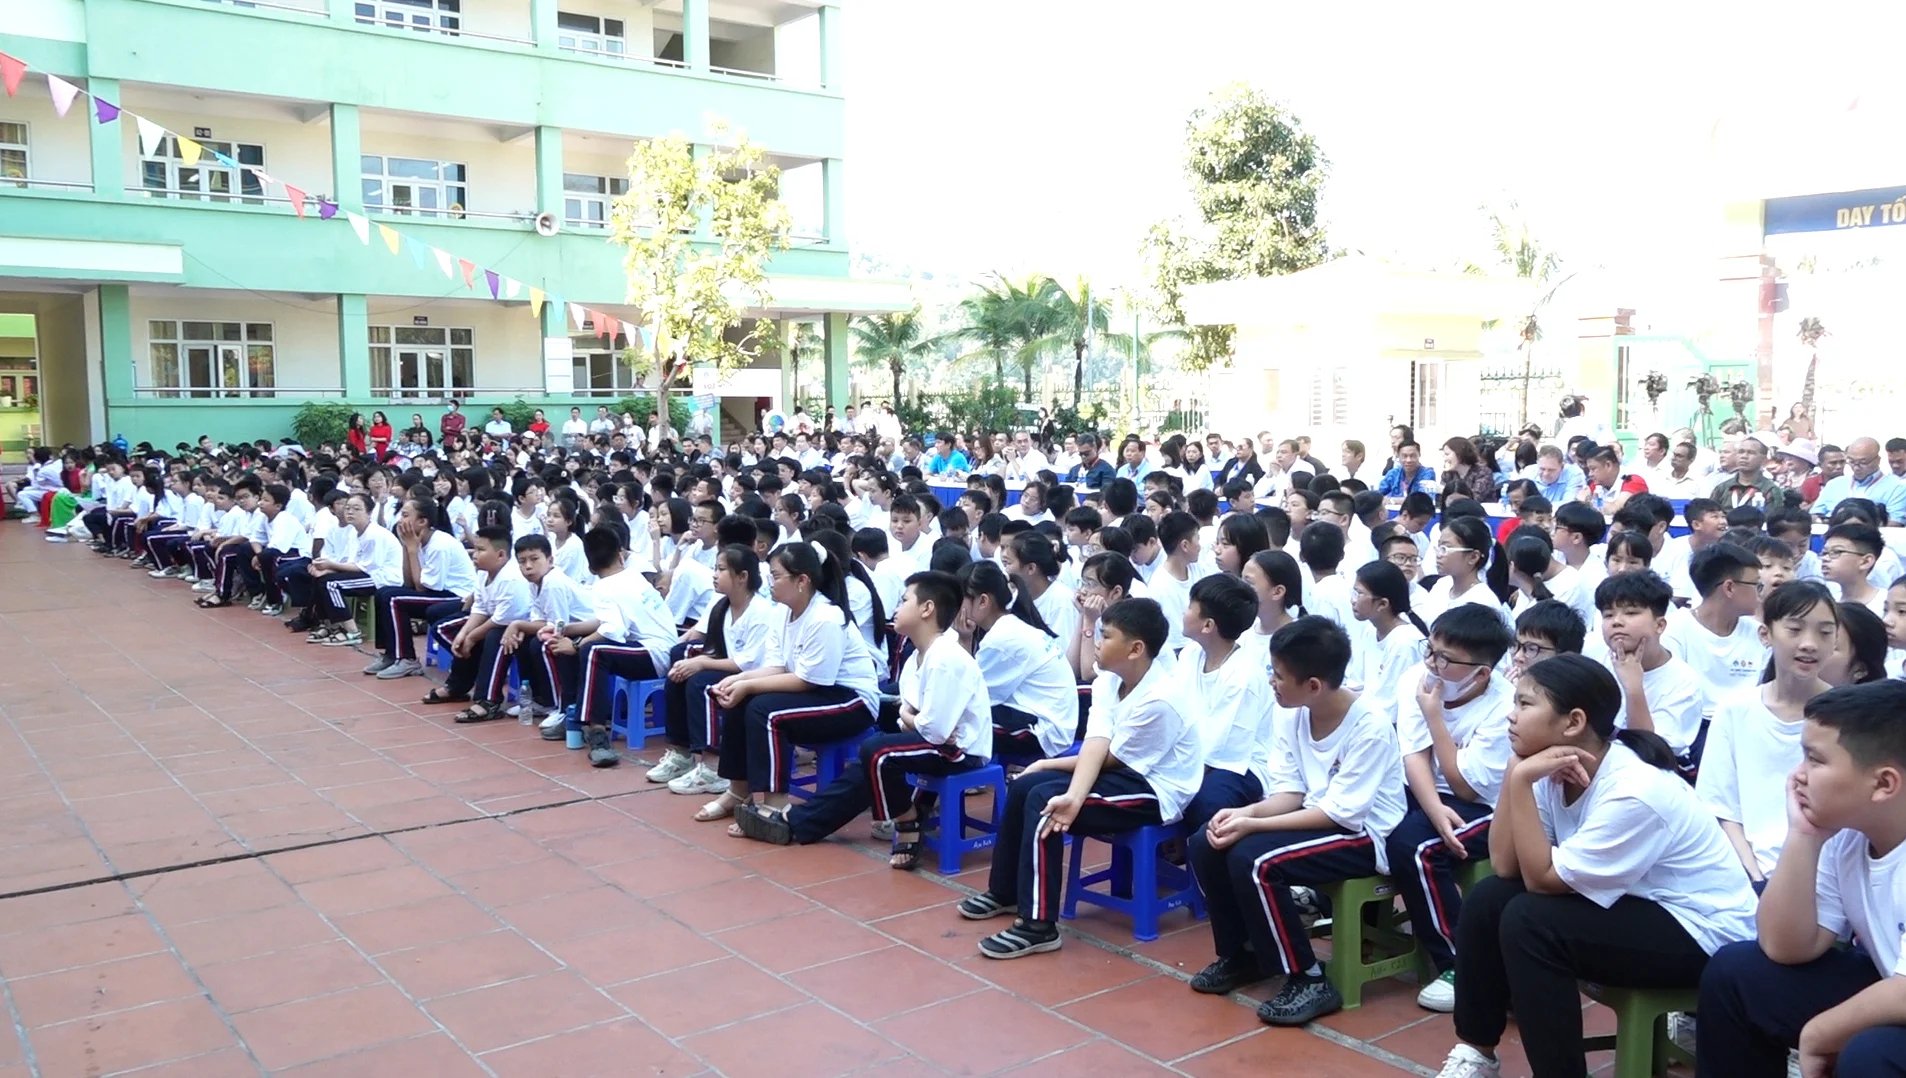 The ceremony was held at Bai Chay Primary and Secondary School (Ha Long City, Quang Ninh). Photo: Nguyen Thanh.